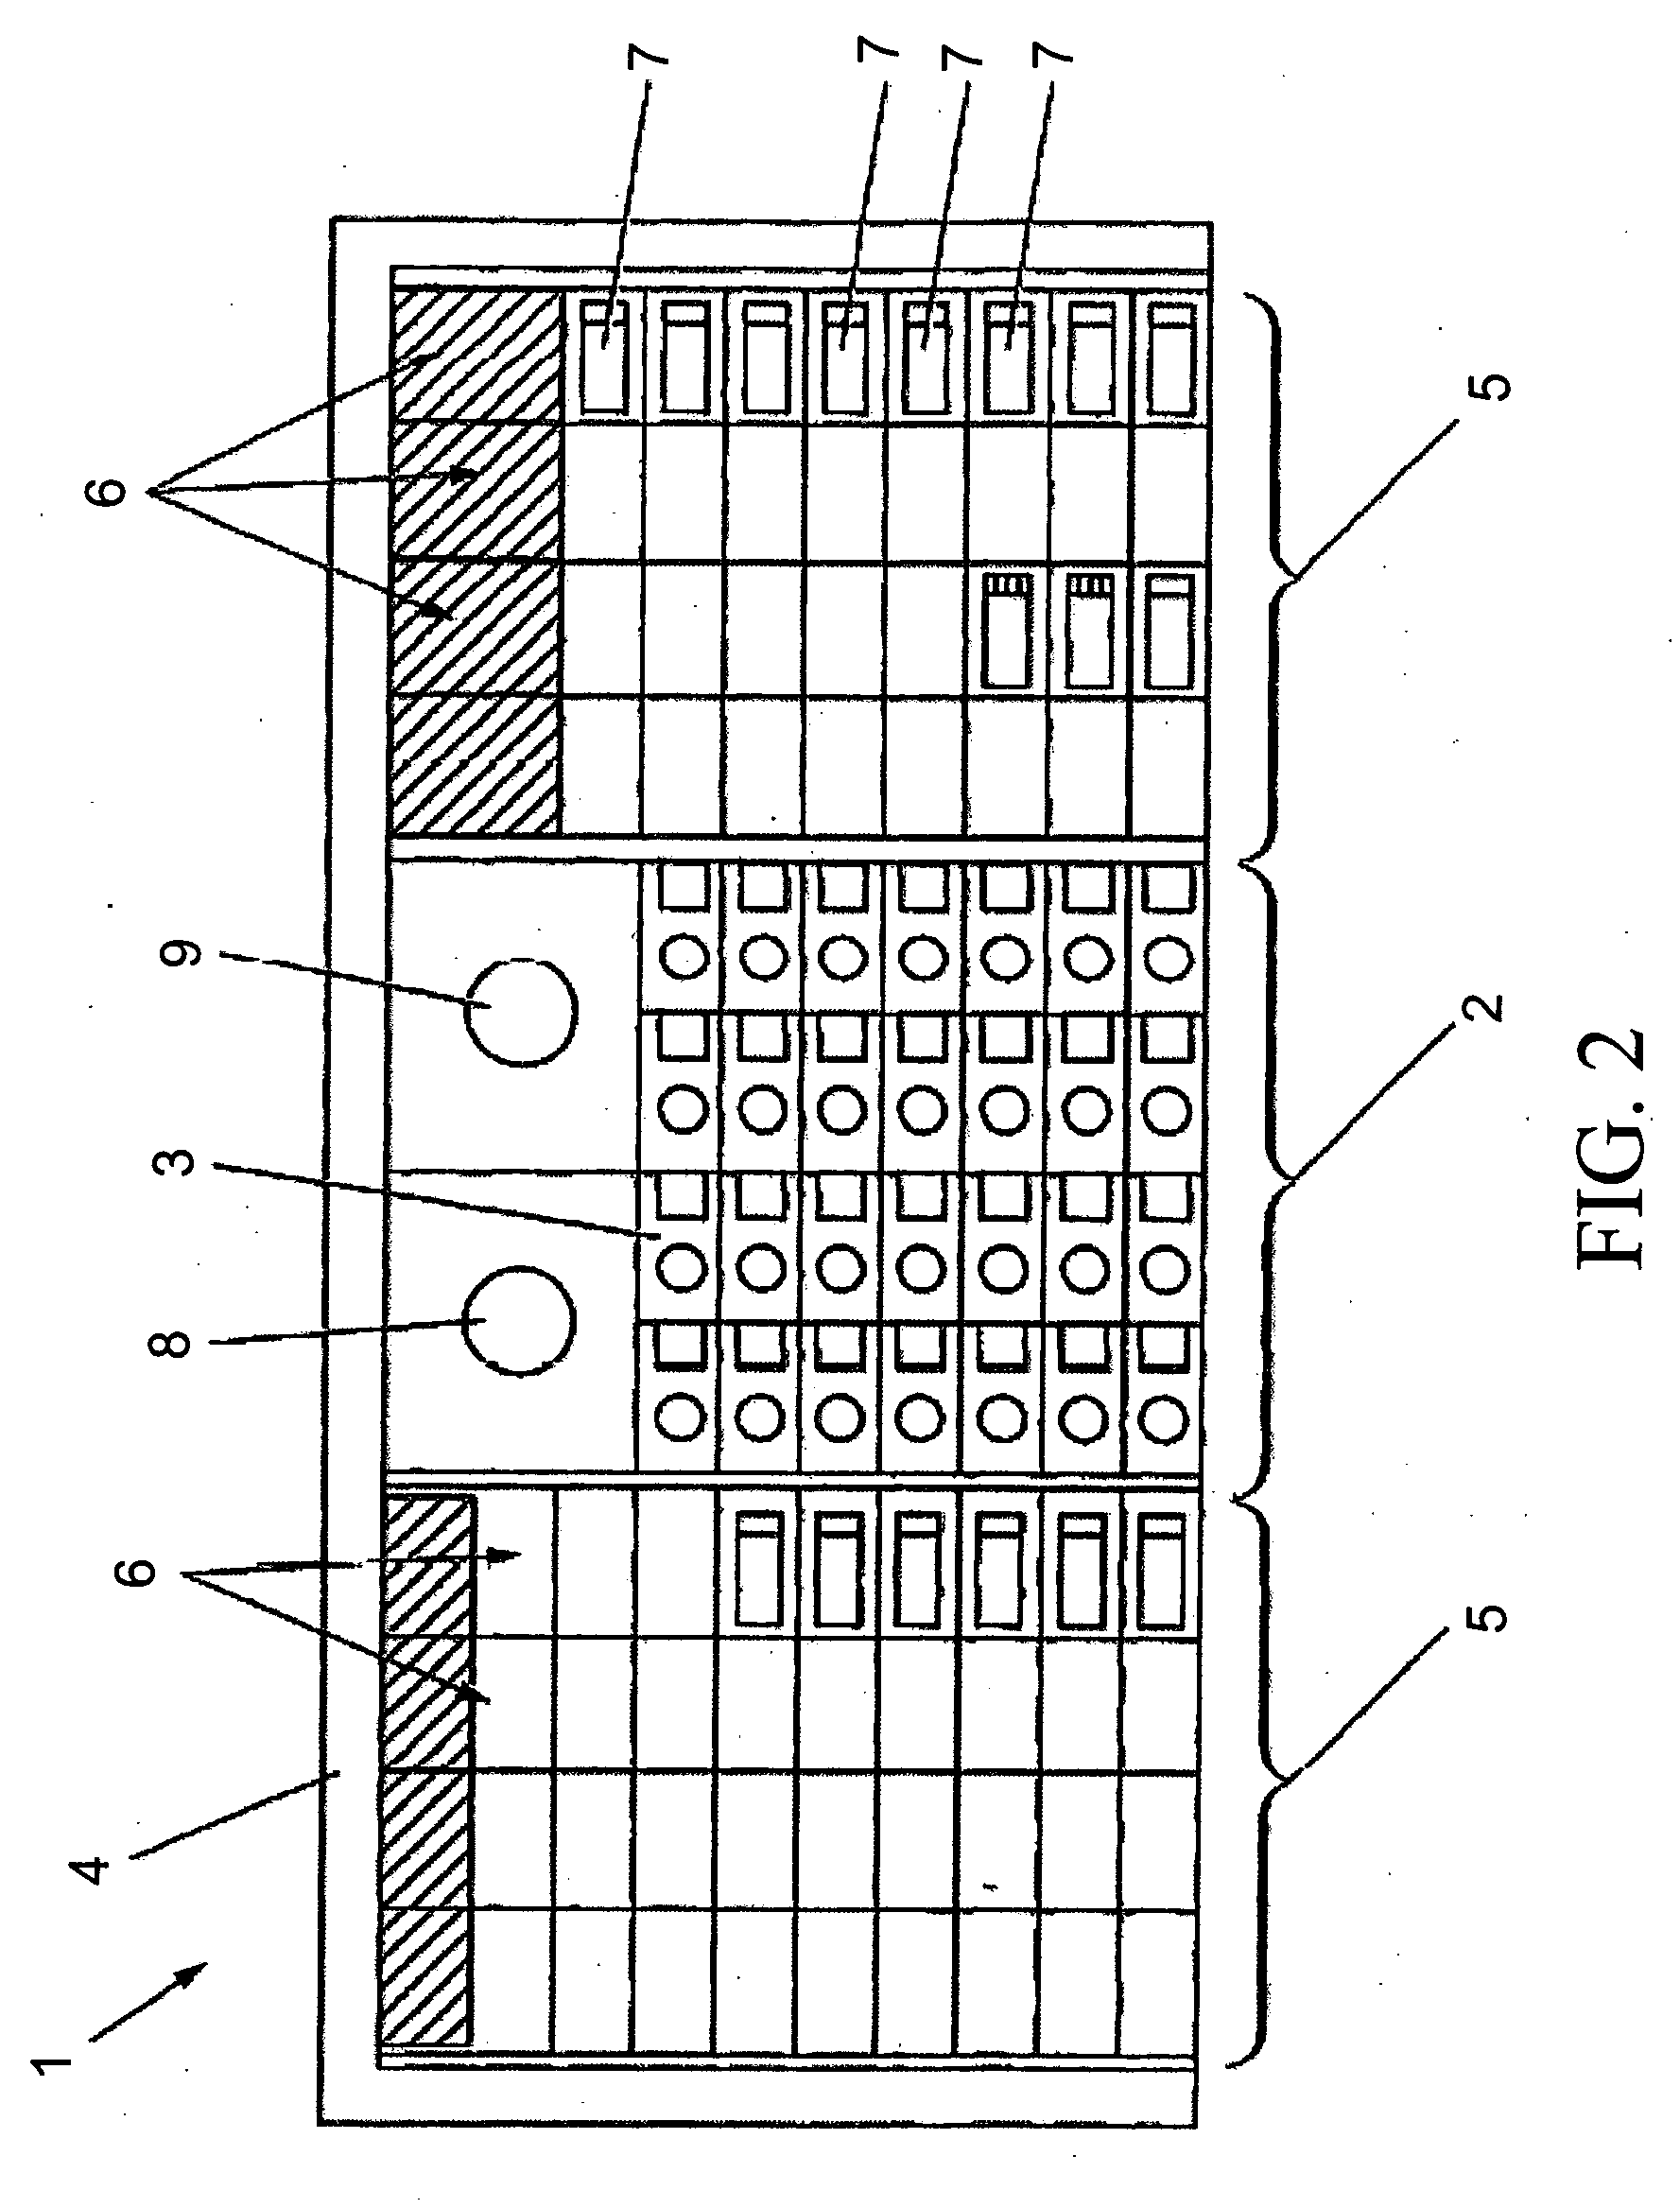 Method and apparatus for automated pre-treatment and processing of biological samples